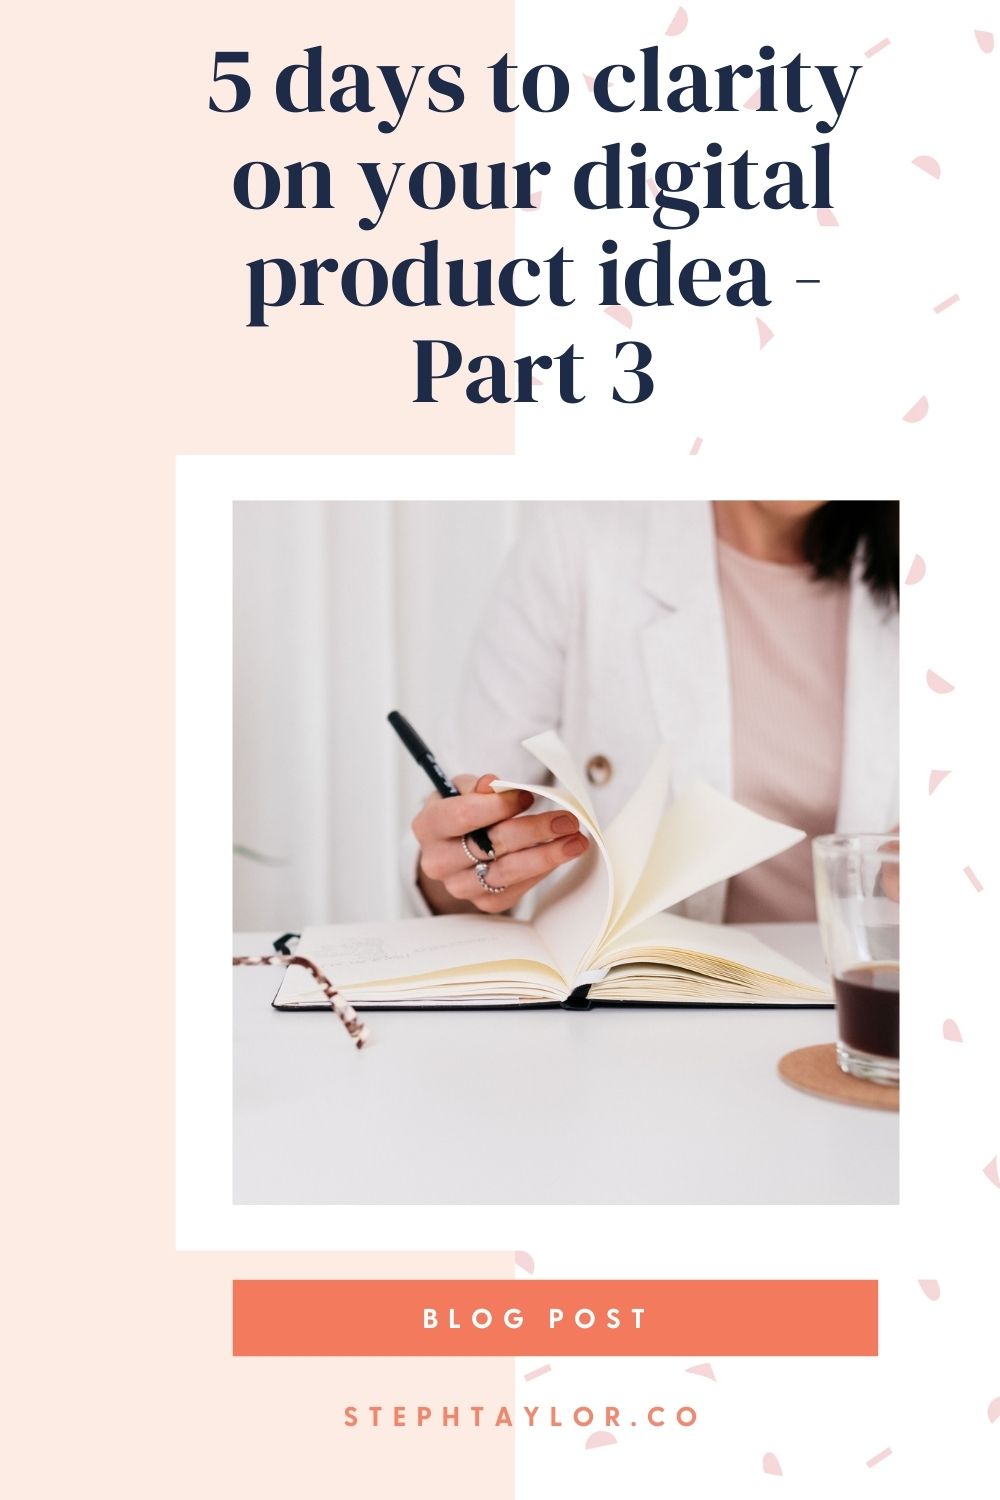 5 days to clarity on your digital product idea – Part 3